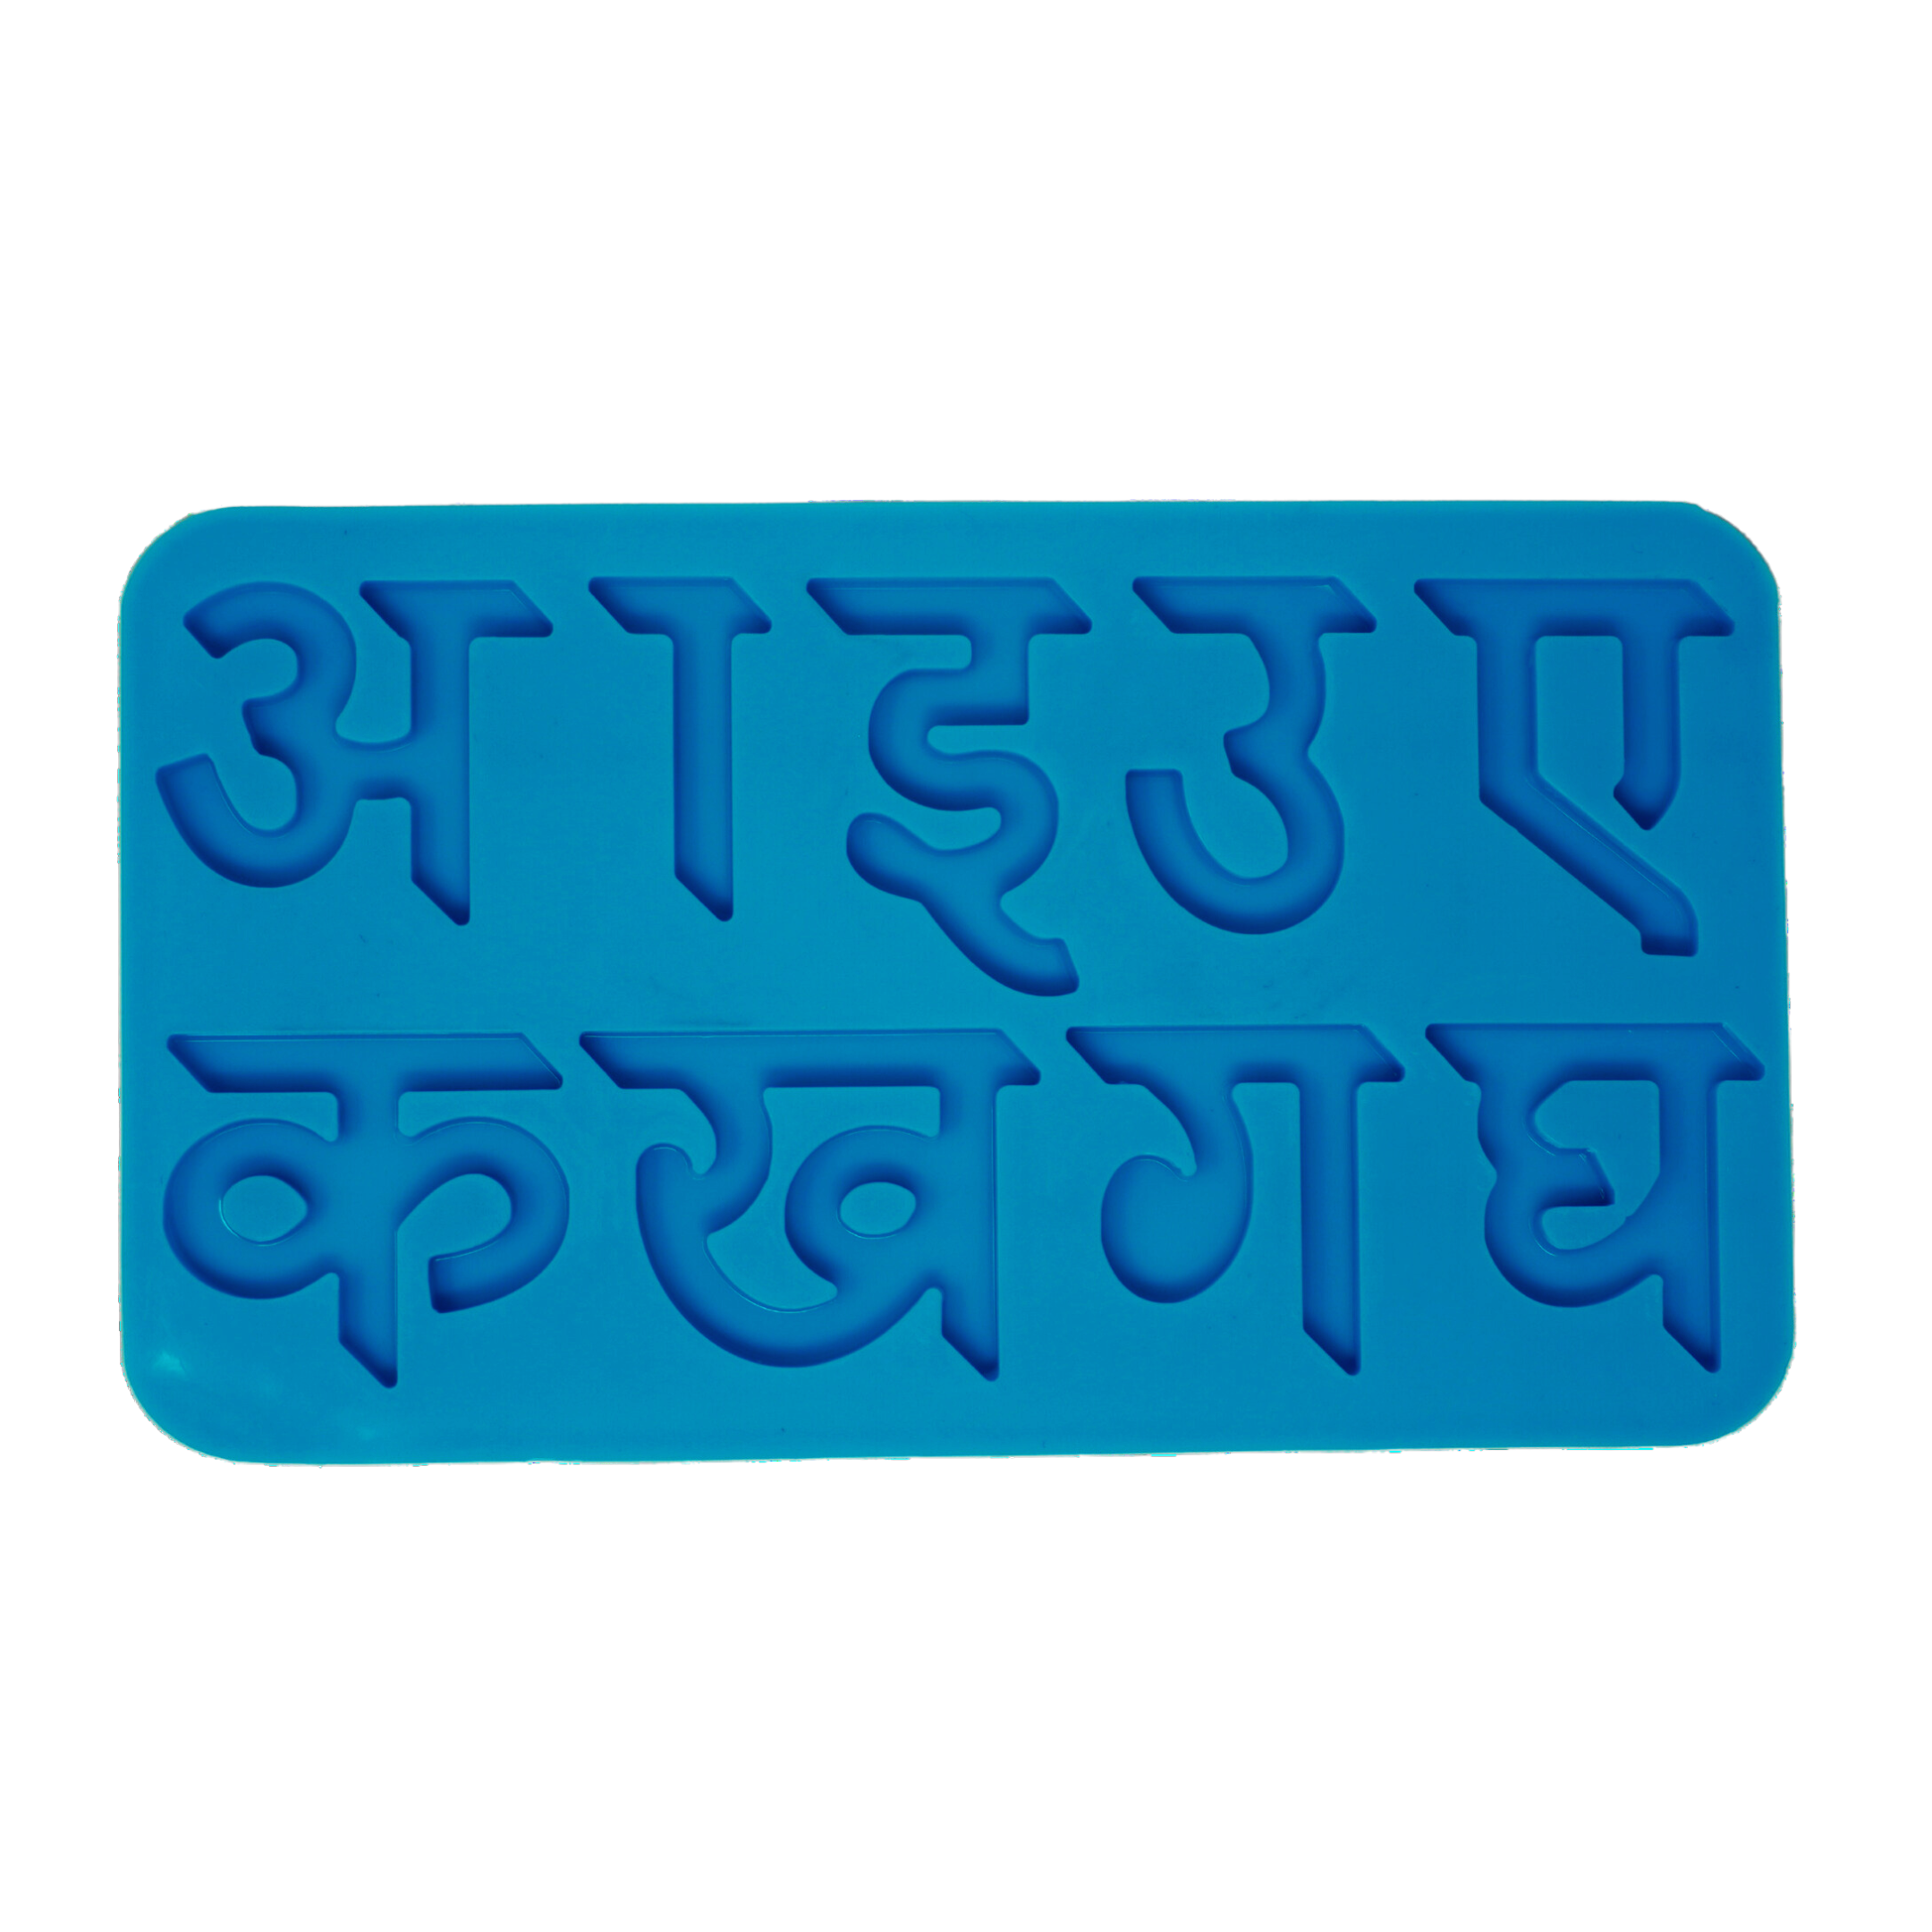 Hindi Alphabets Mould 1 - Ah - The Mould Story